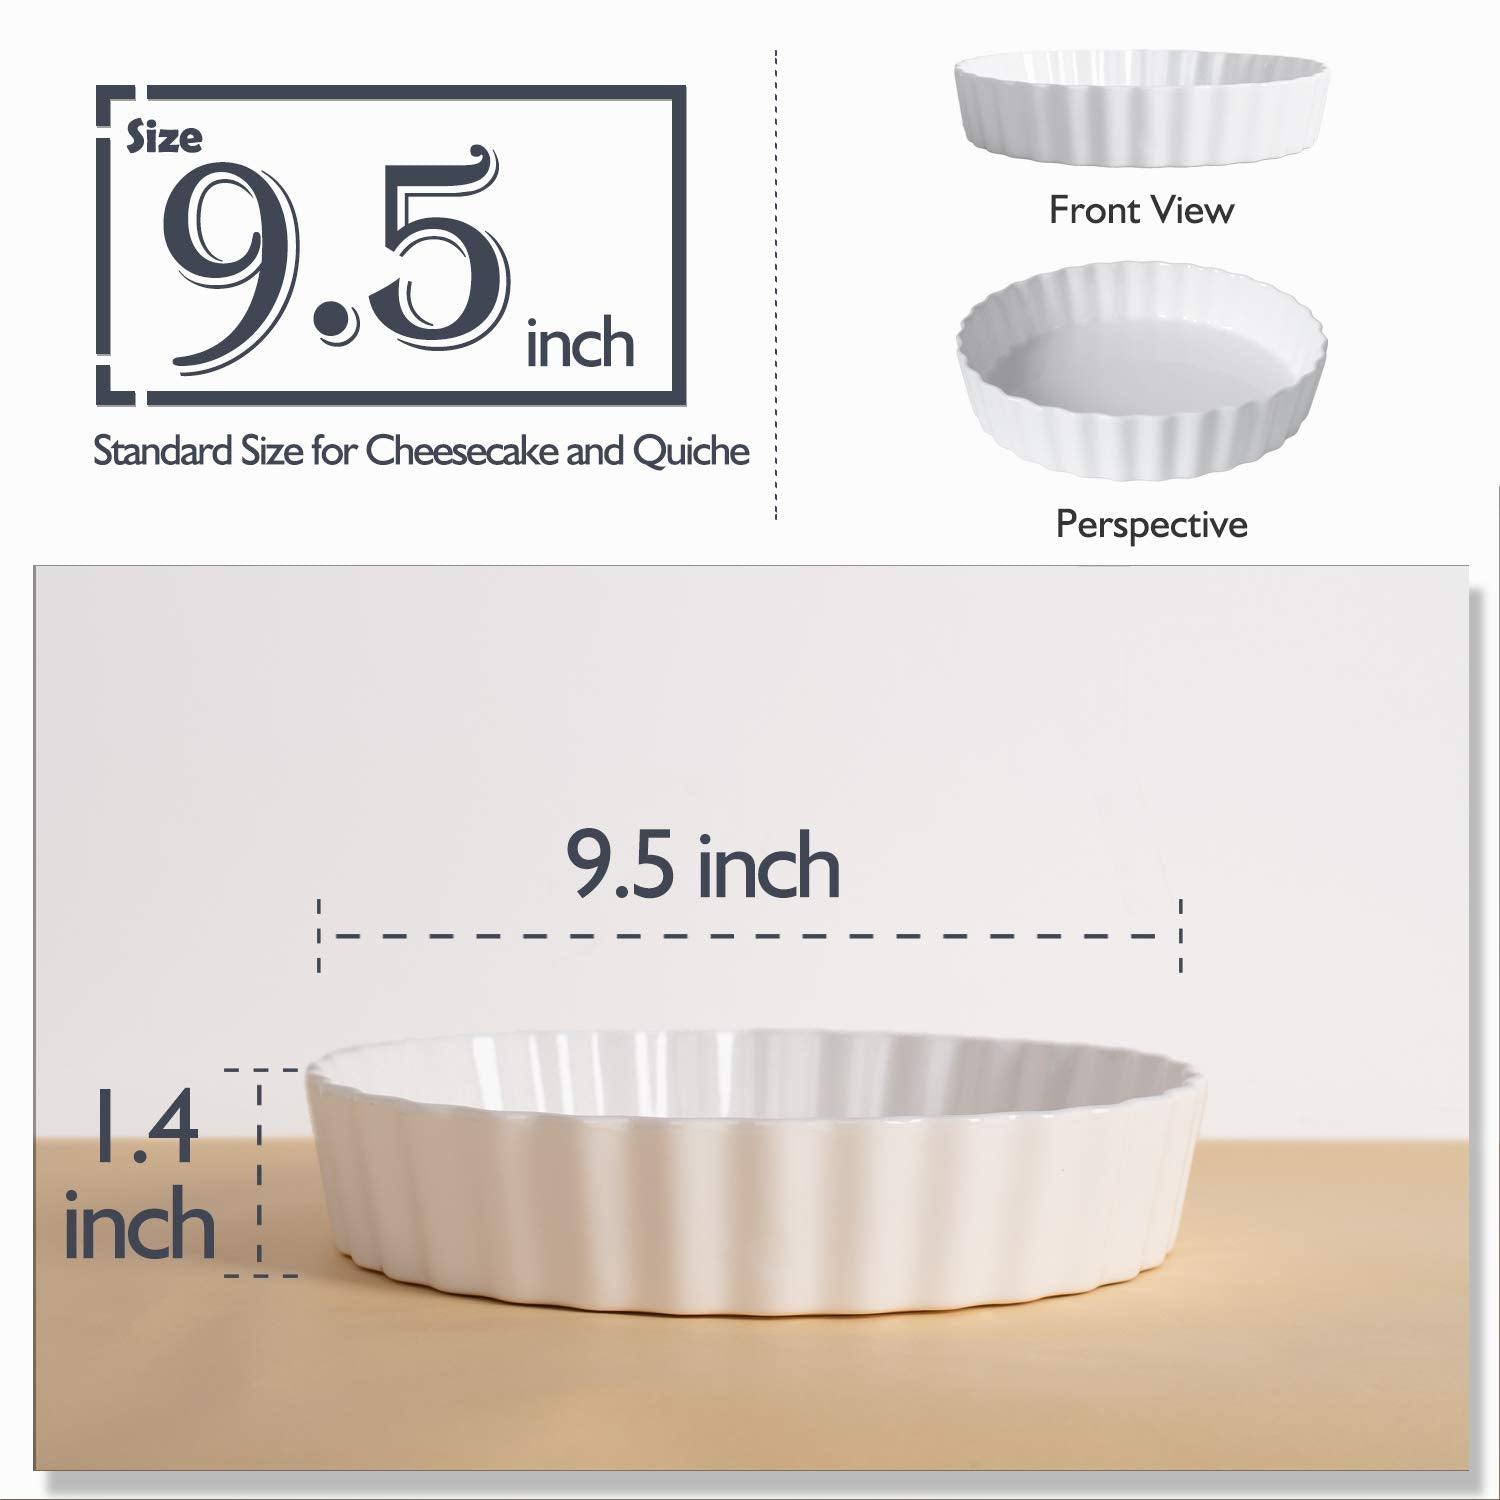 DELLING Set of 2 Tart Pans, 9.5 inch Quiche Pan, Ceramic Fluted Quiche Baking Dish/Pie Pan, Perfect for Baking Tart Pies and Chicken Pot Pie, Cheesecake, Creme Brulee, Round, White - CookCave